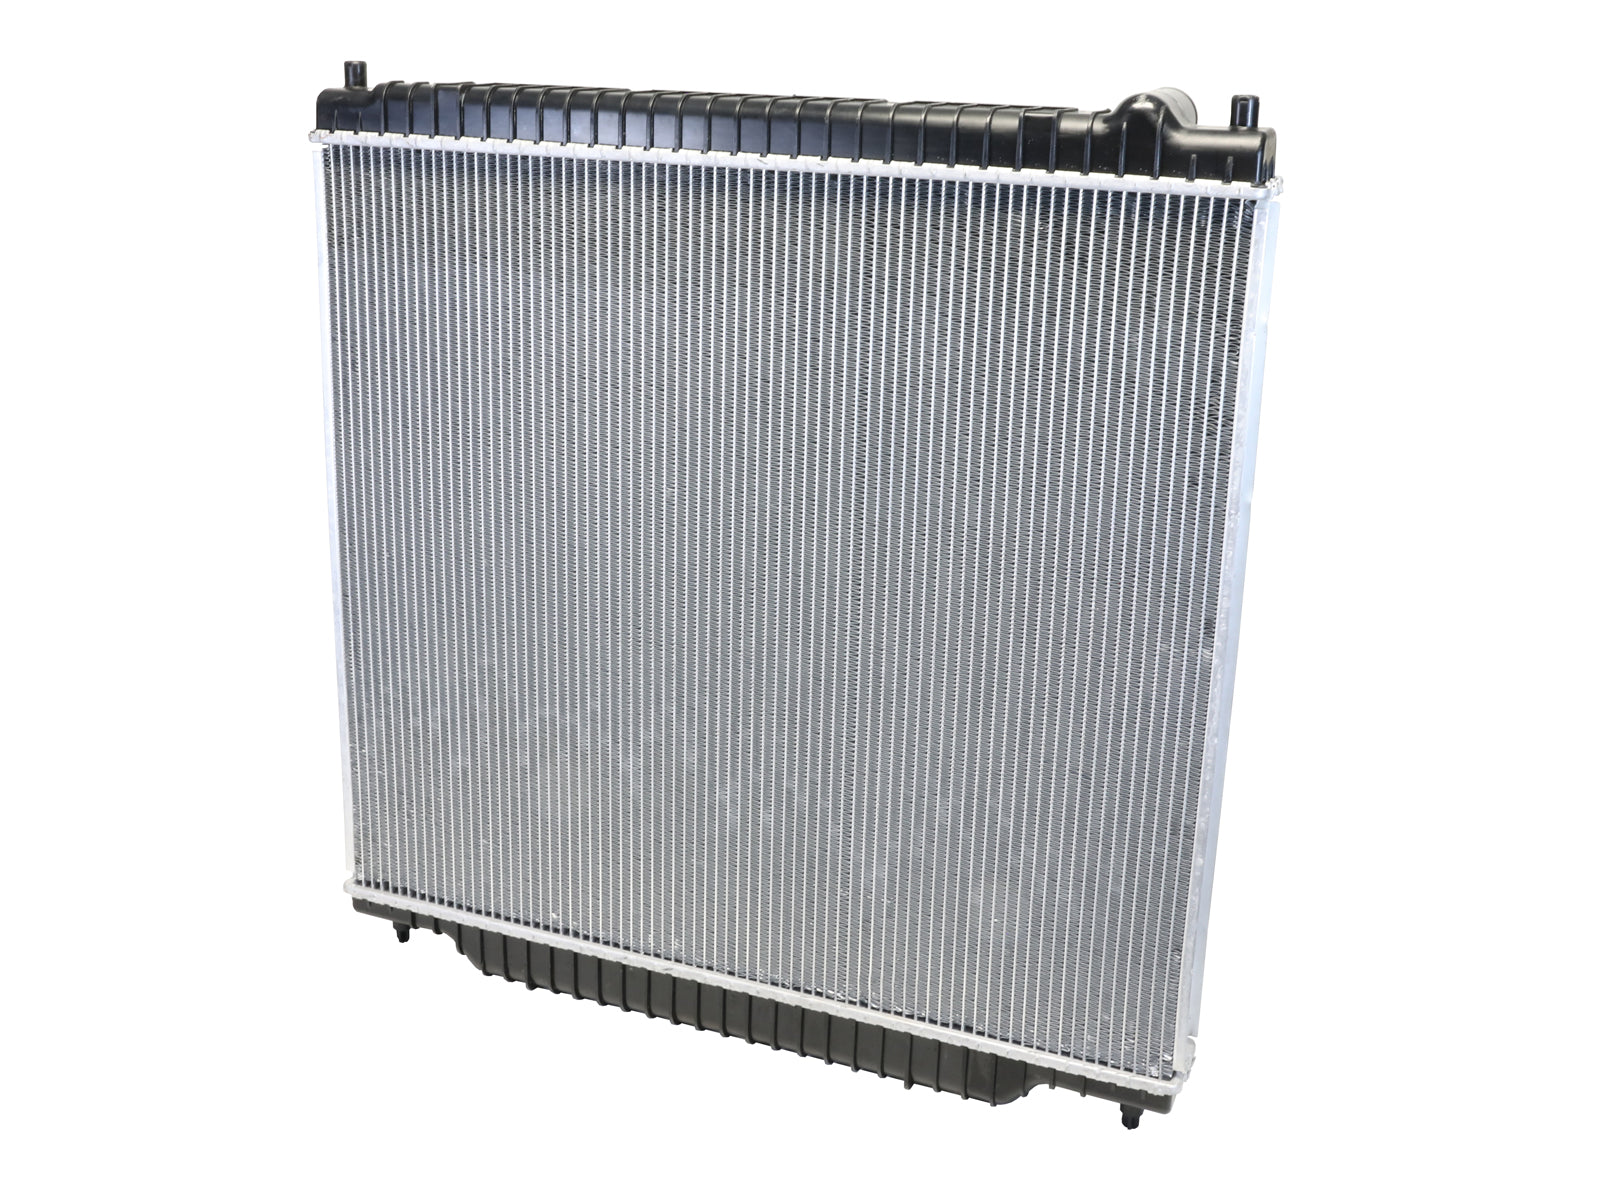 aFe Power Ford (Motorhome - Stripped Chassis - 6.8, 7.3) Radiator 46-53051